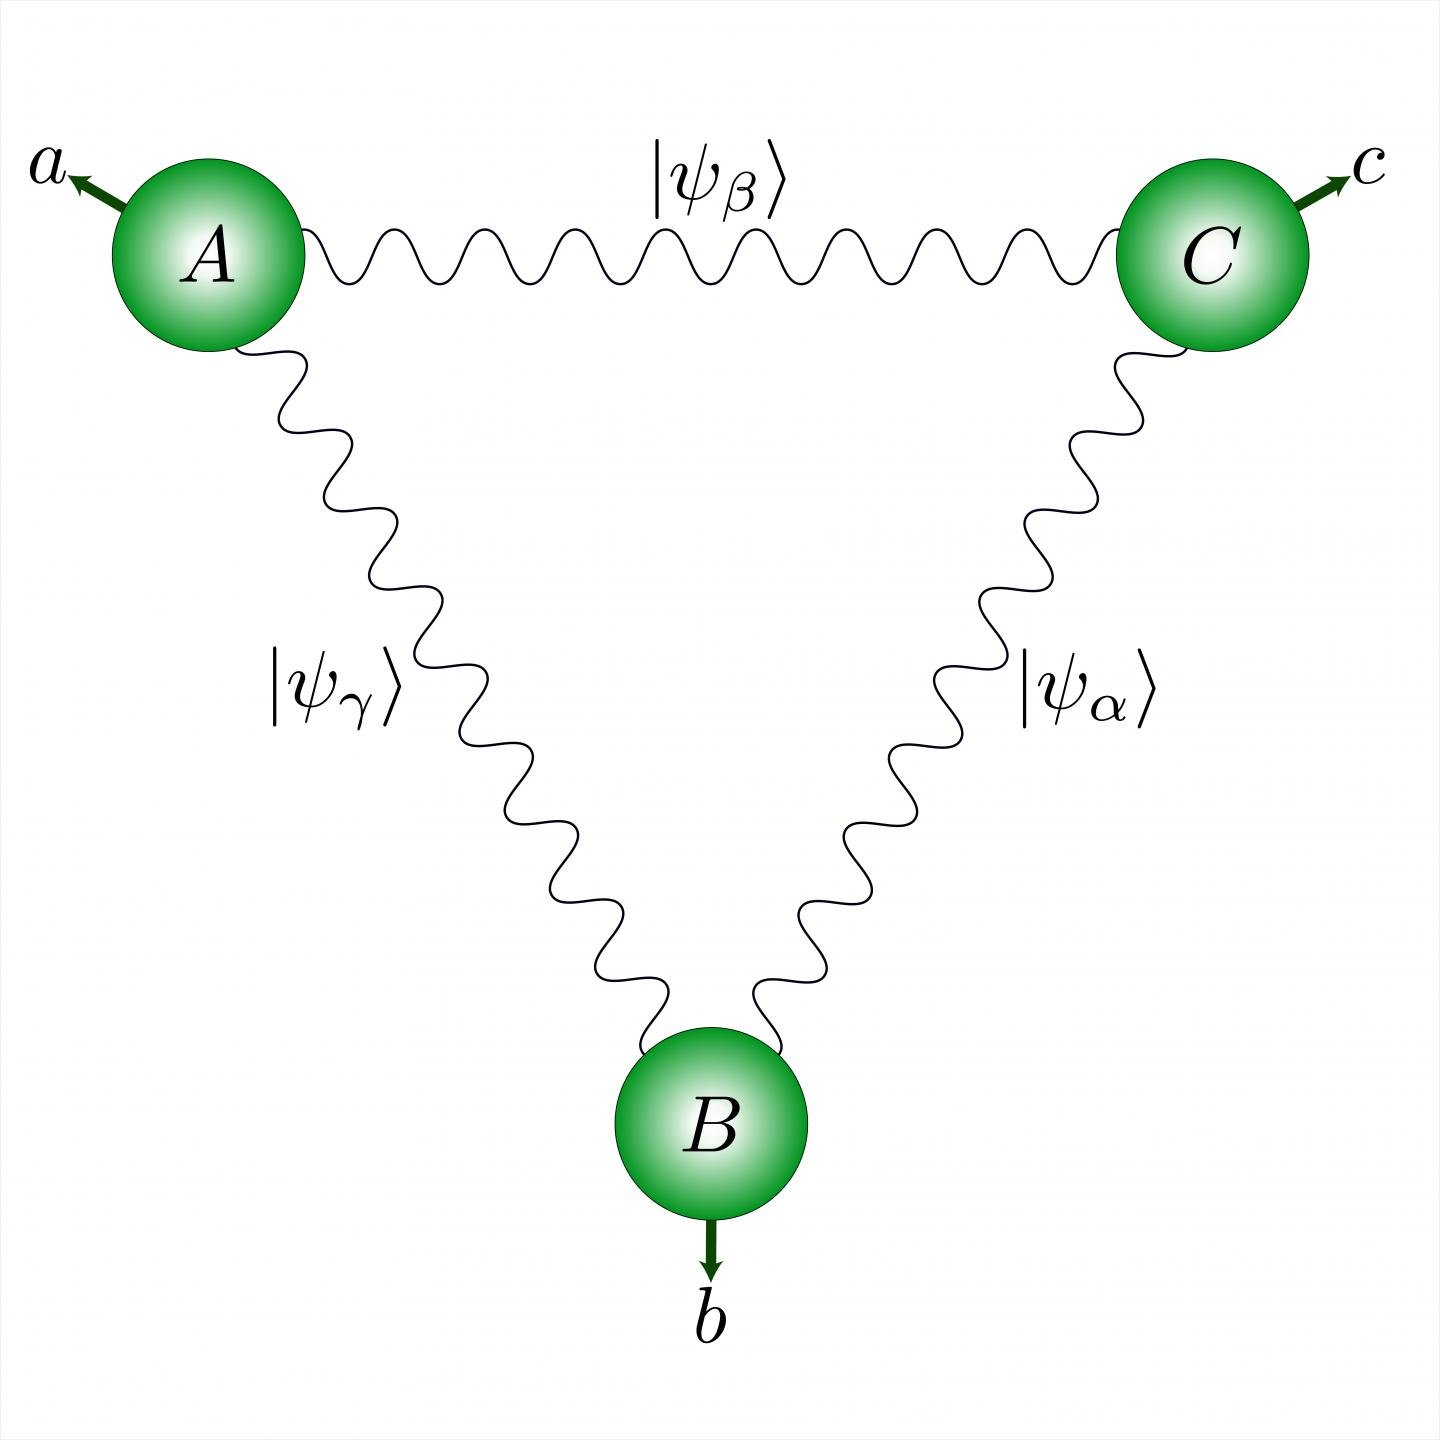 A quantum network with a triangular structure allows for a fundamentally novel type of quantum correlations. Courtesy of UNIGE.